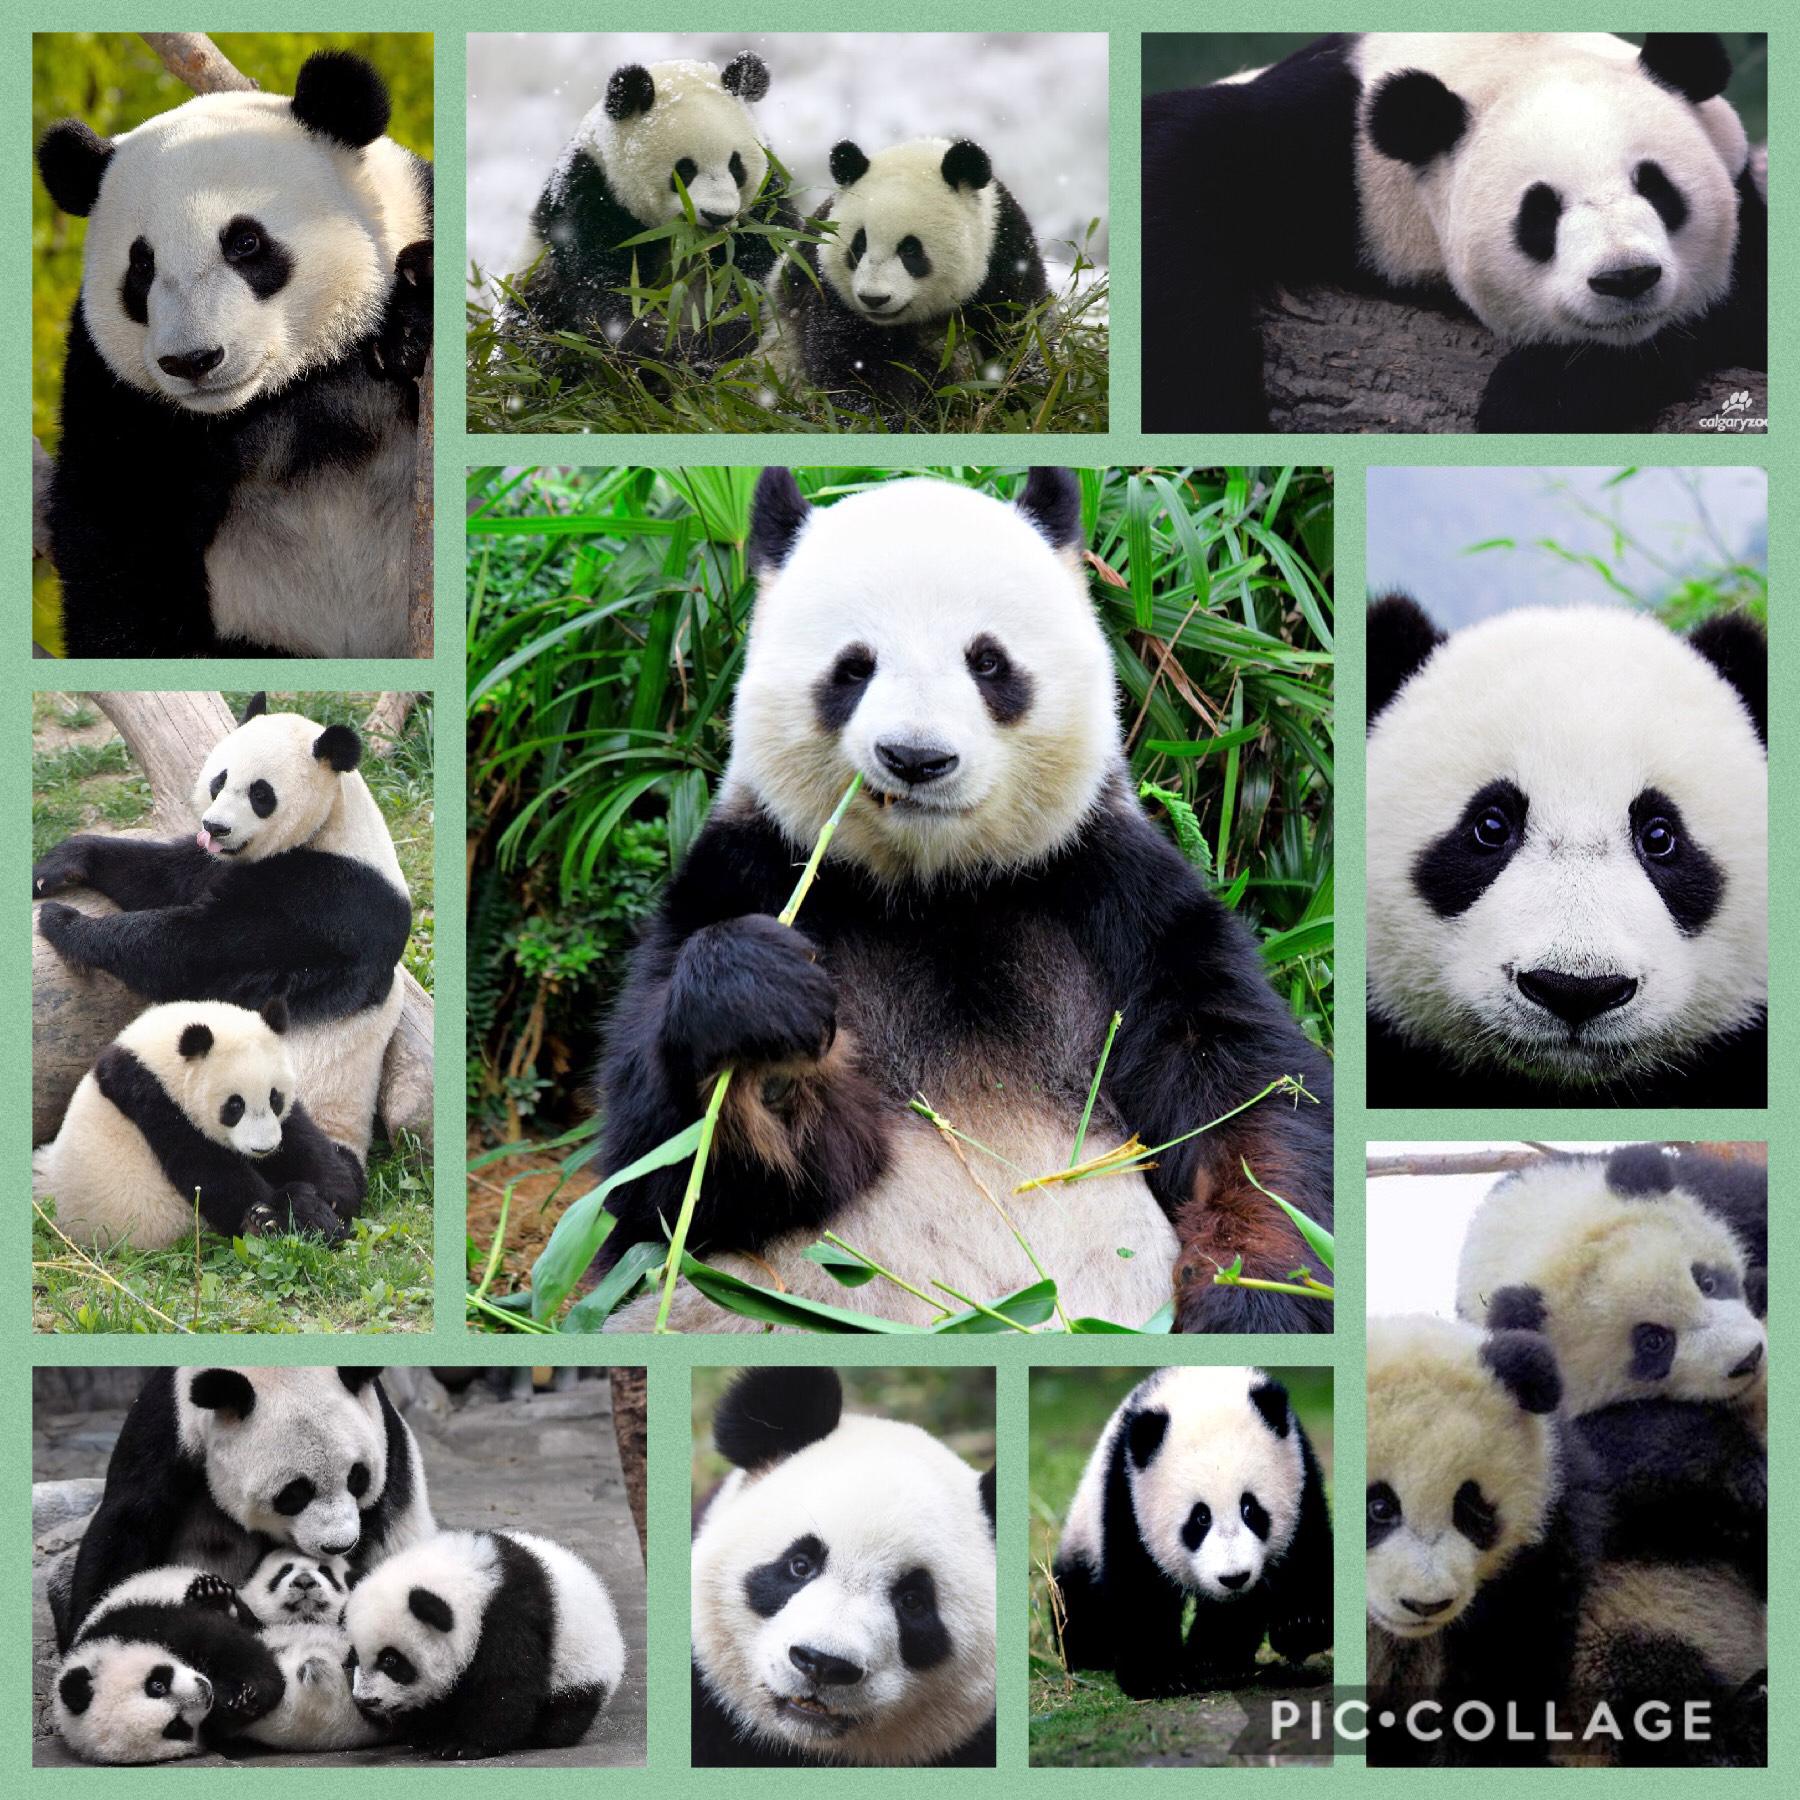 Fun fact about me: I love pandas!!!
Comment: what’s your favorite animal?